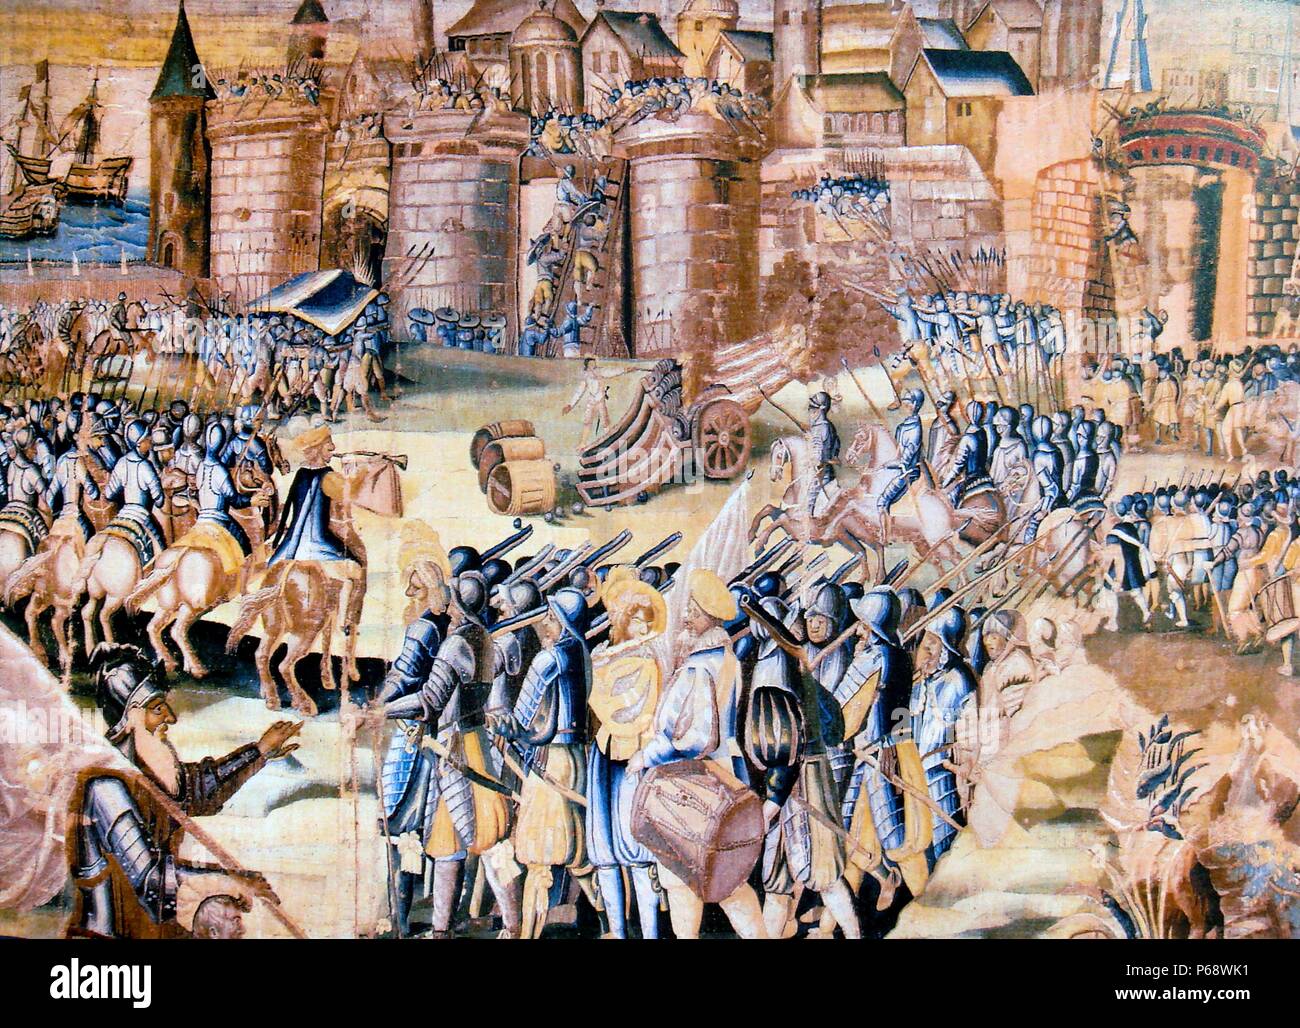 Tapestry depicting the Siege of La Rochelle of 1572–1573. military assault on the Huguenot-held city of La Rochelle by Catholic troops during the fourth phase of the French Wars of Religion, following the August 1572 St. Bartholomew's Day massacre Stock Photo